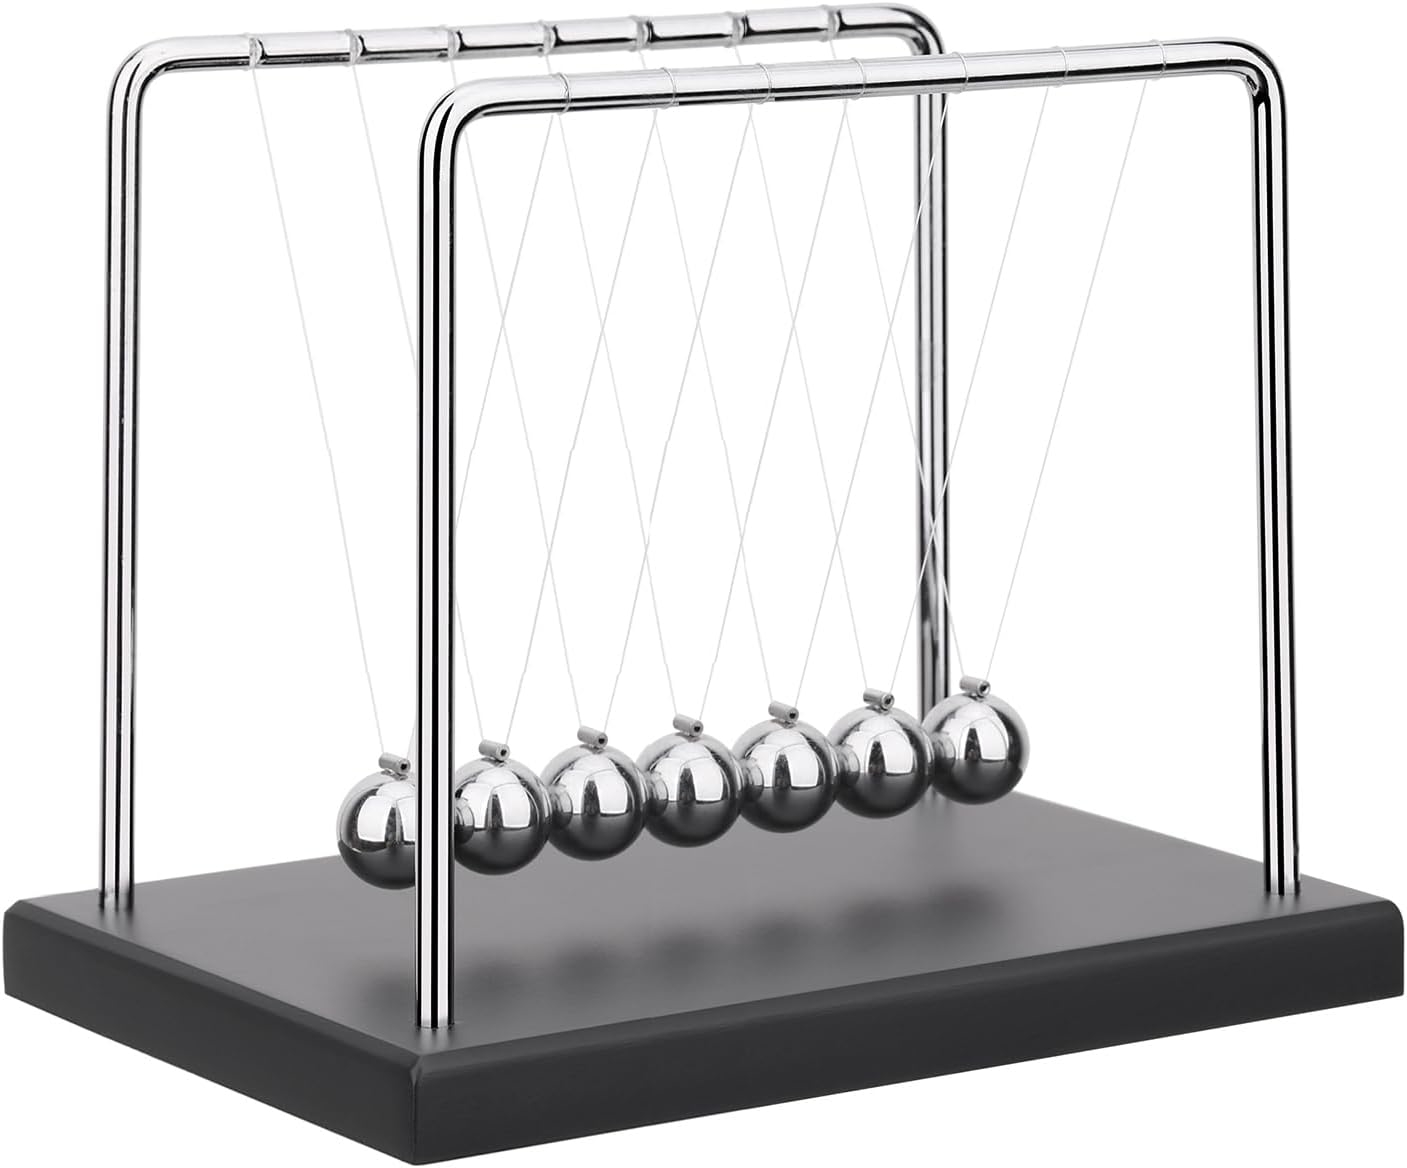 Newton&#x27;s cradle with six metal spheres on a black base, used to demonstrate conservation of momentum and energy